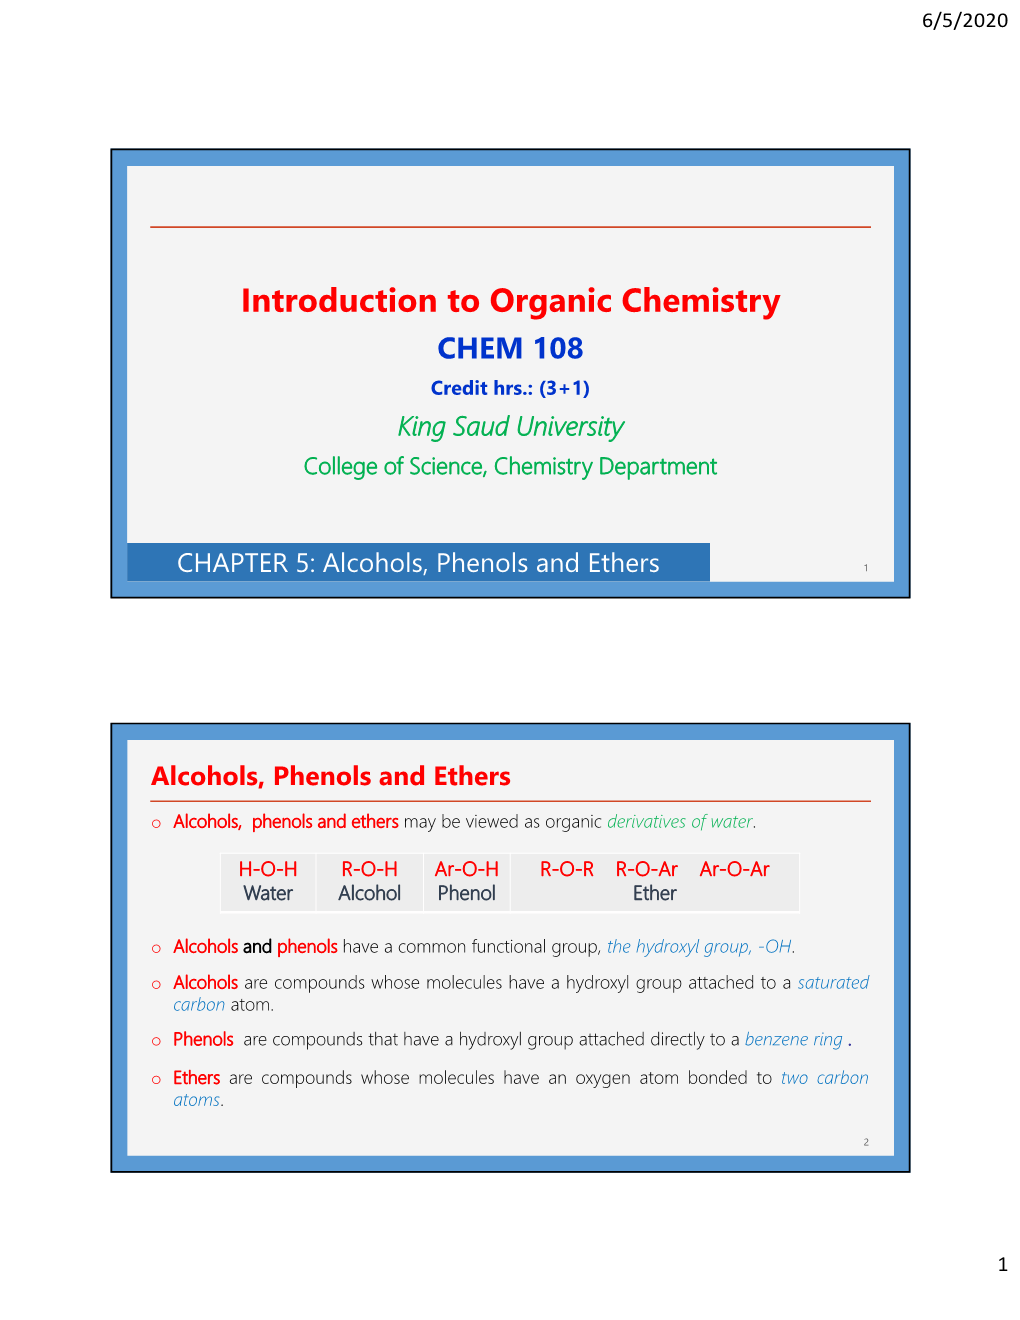 Introduction to Organic Chemistry CHEM 108 Credit Hrs.: (3+1) King Saud University College of Science, Chemistry Department